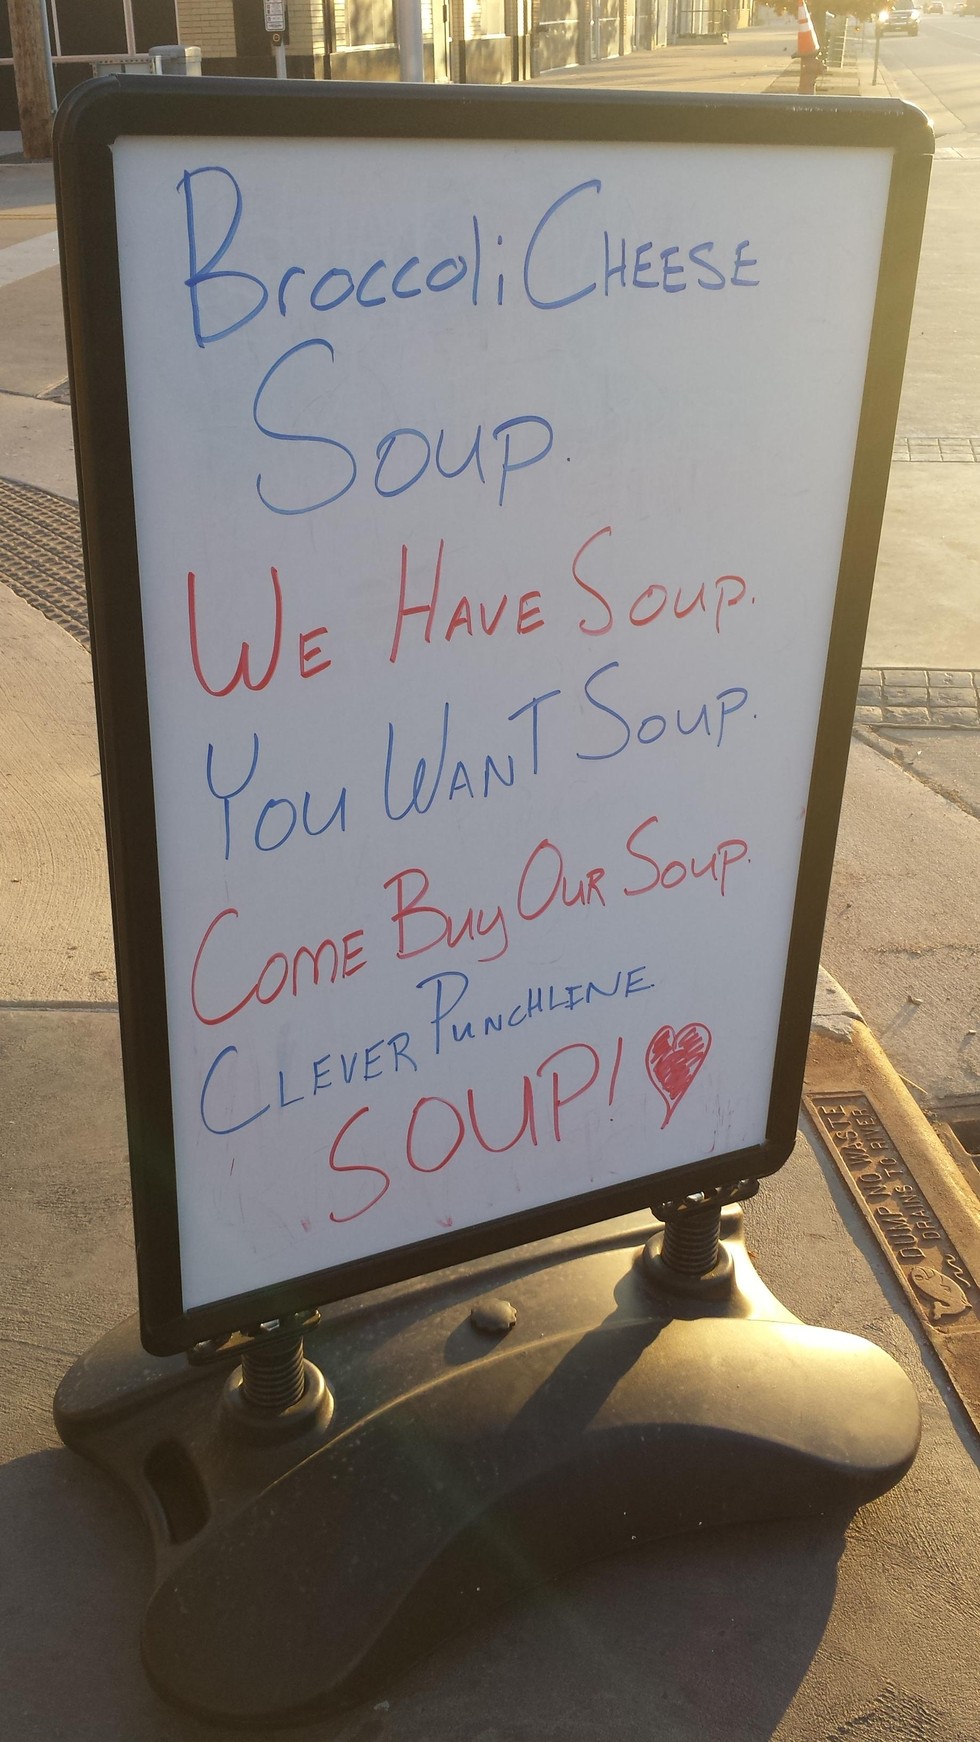 sign - Broccoli Cheese Soup We Have Soup You Want Soup Come Buy Our Soup Lever Tunchline Souple Dump Mo Waste Drans To River u